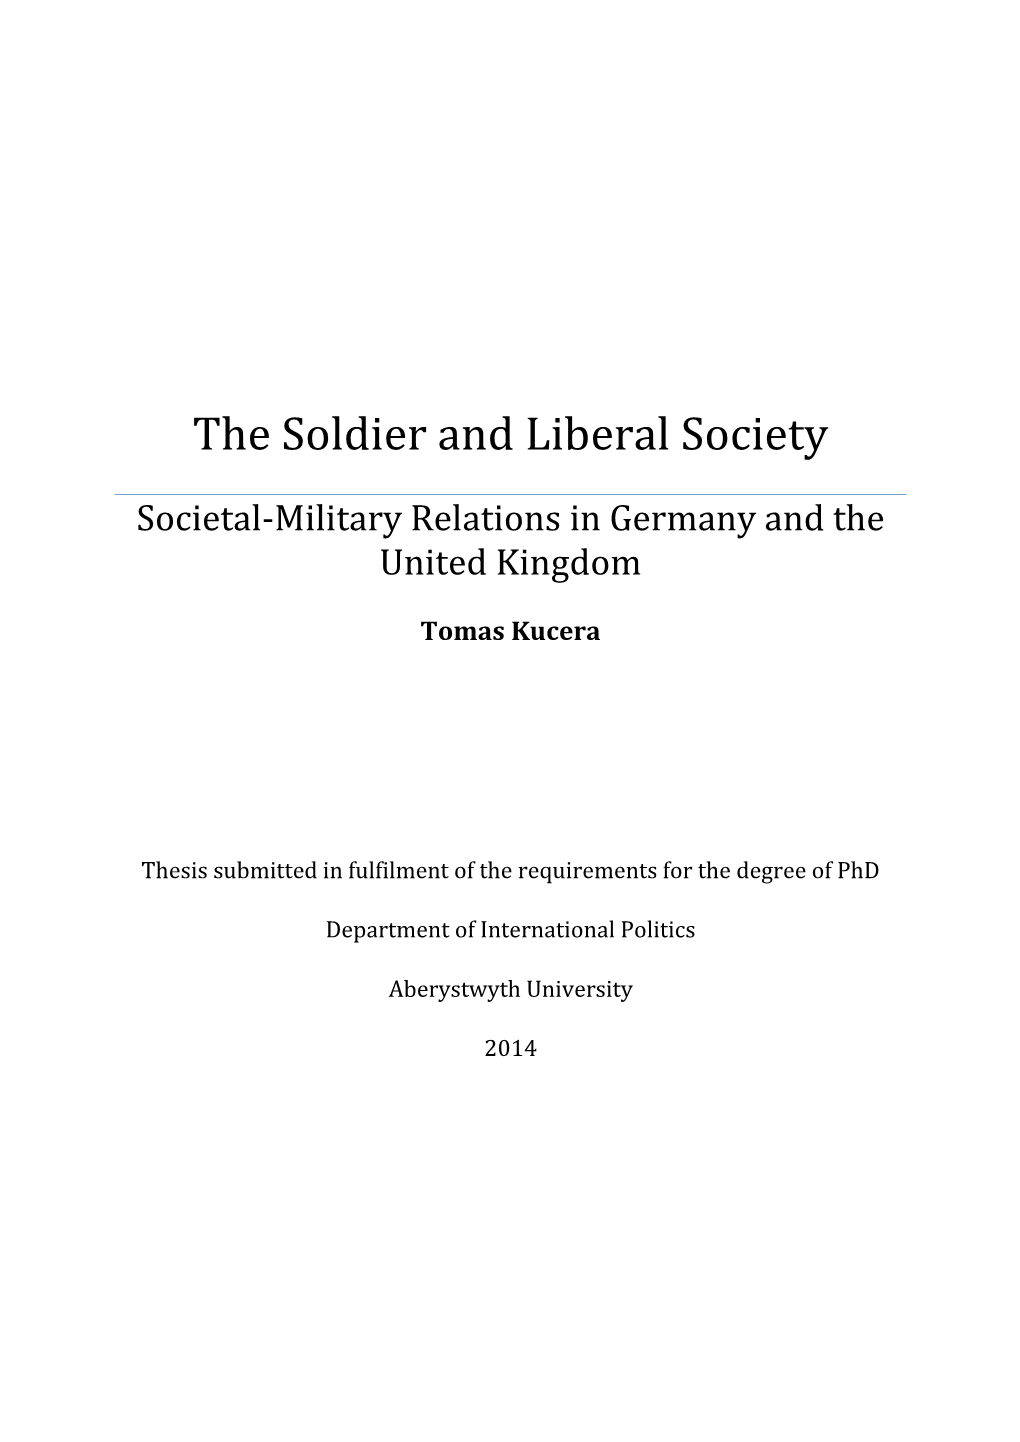 The Soldier and Liberal Society Societal-Military Relations in Germany and the United Kingdom